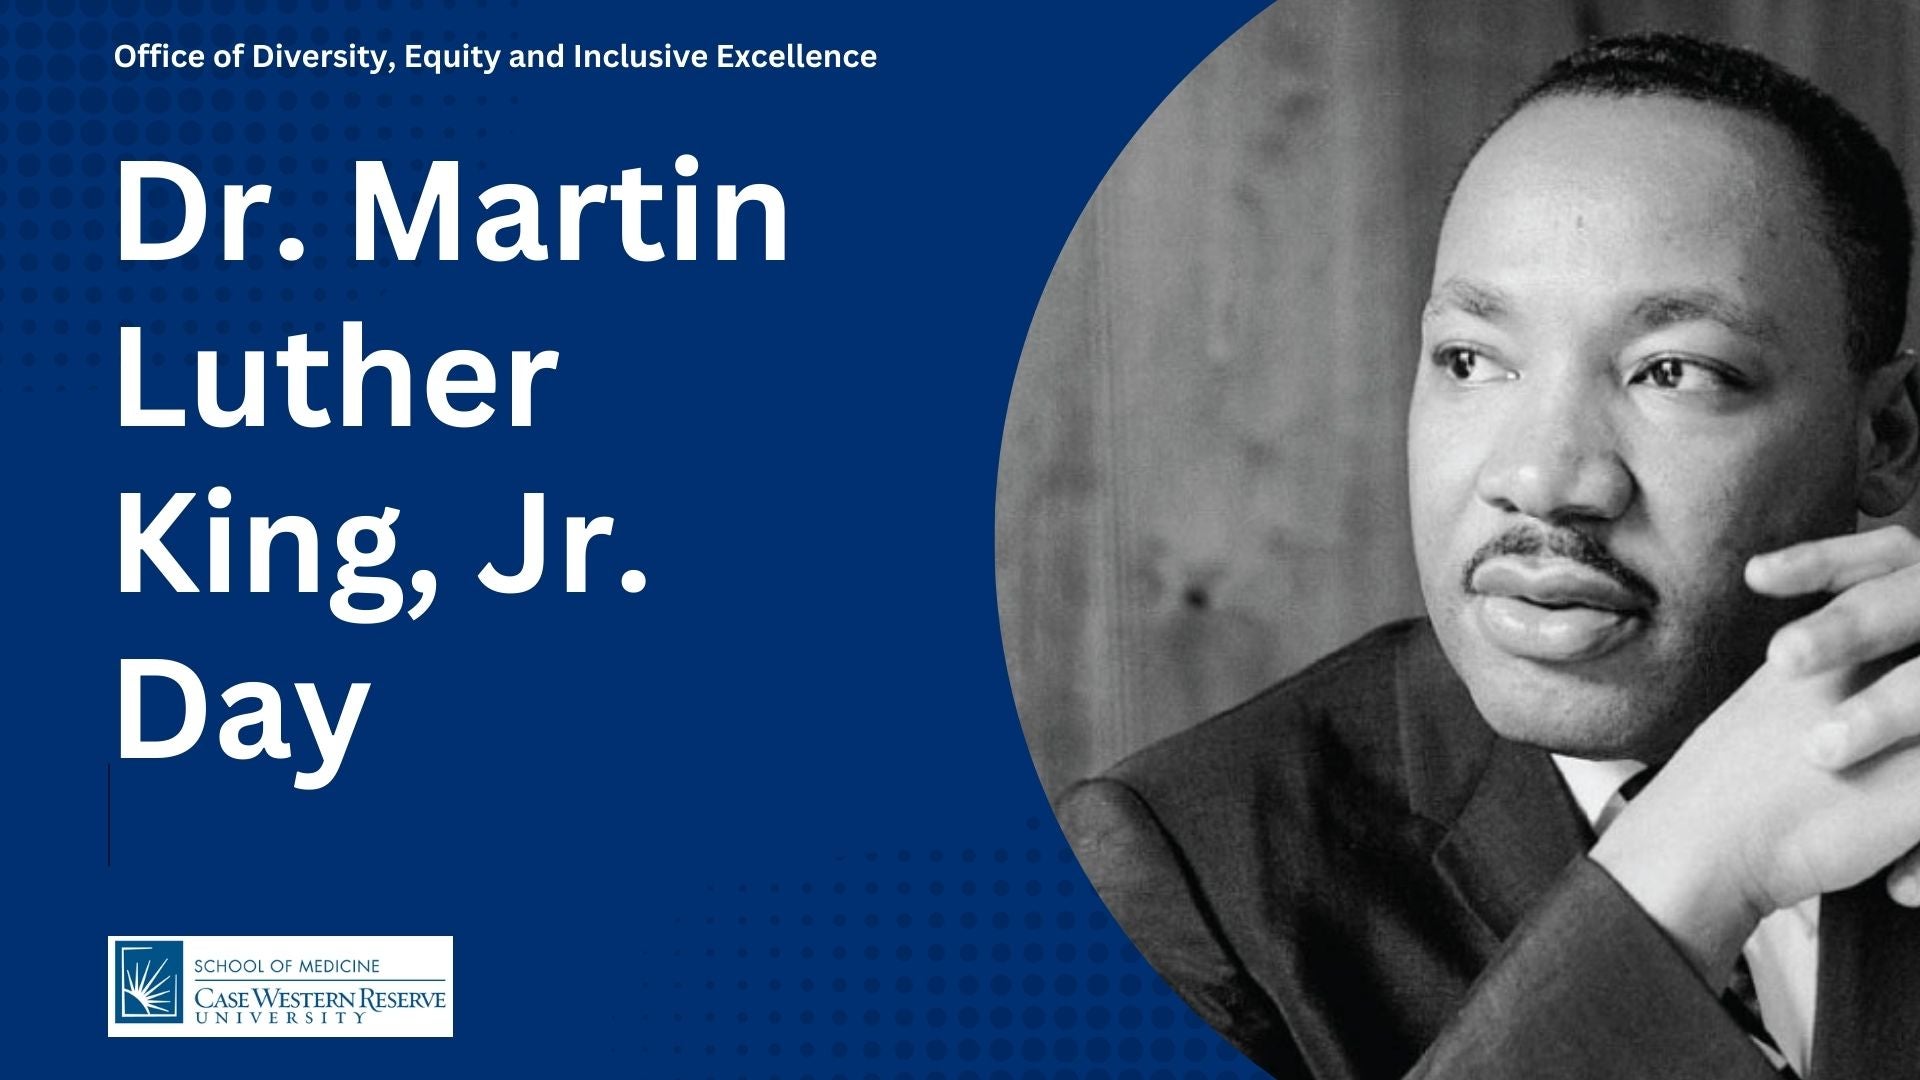 January: Dr. Martin Luther King, Jr. Day